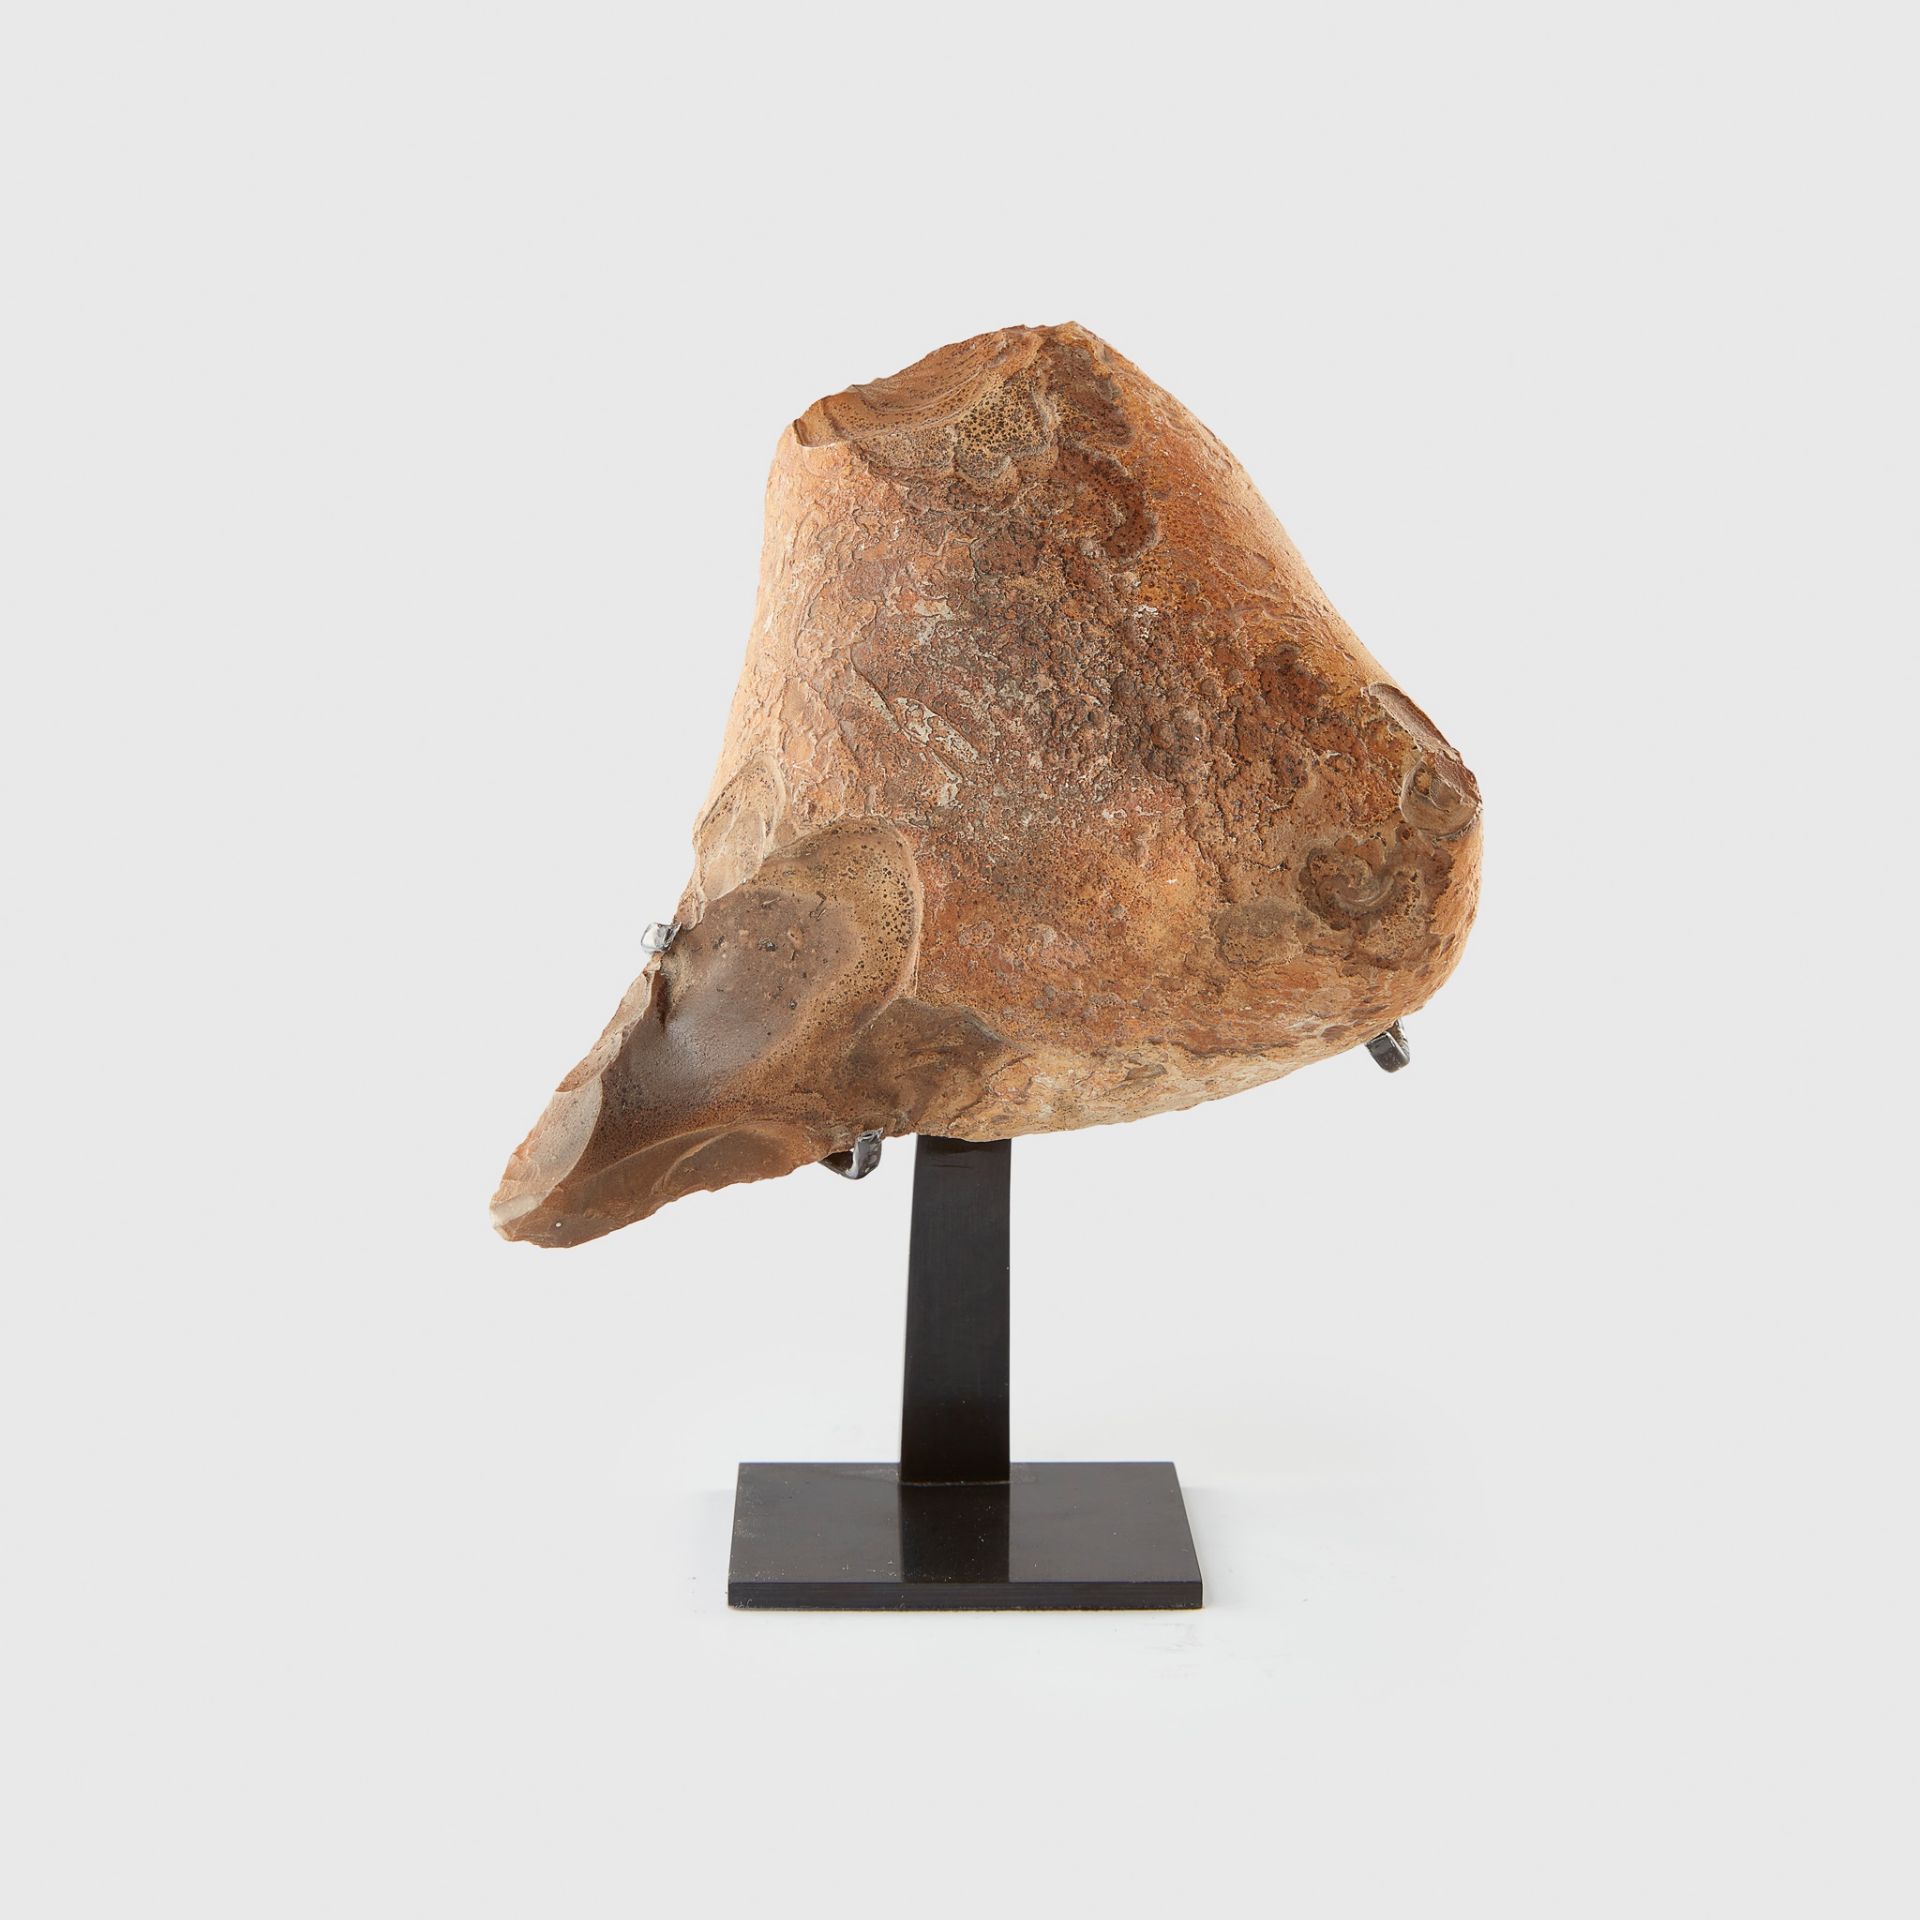 PUBLISHED 1914 PREDYNASTIC EGYPTIAN FLINT HAND AXE EGYPT, LATE MESOLITHIC, c. 7,000 - 6,000 B.C.